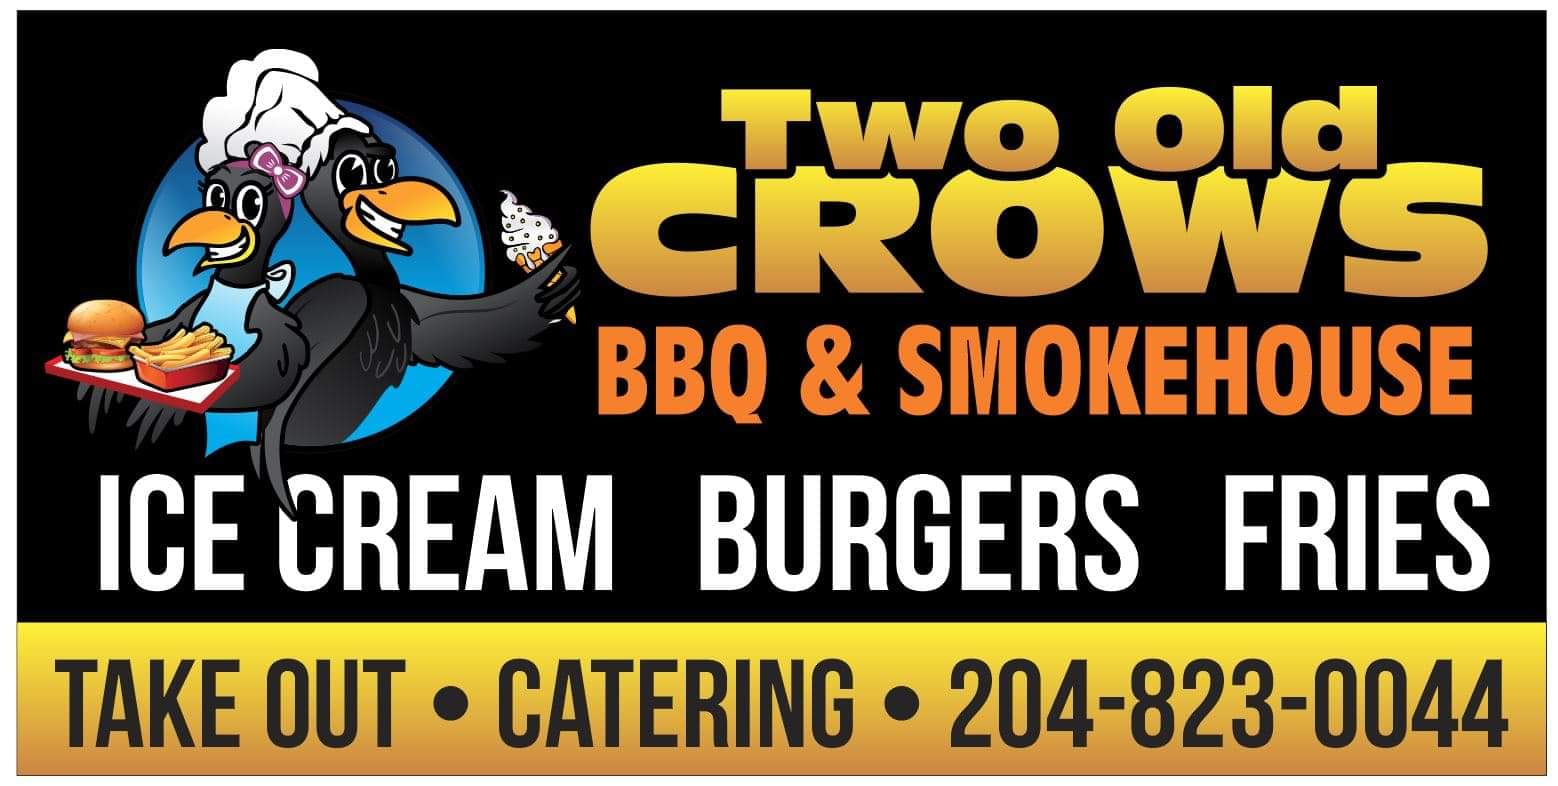 Two Old Crows BBQ & Smokehouse